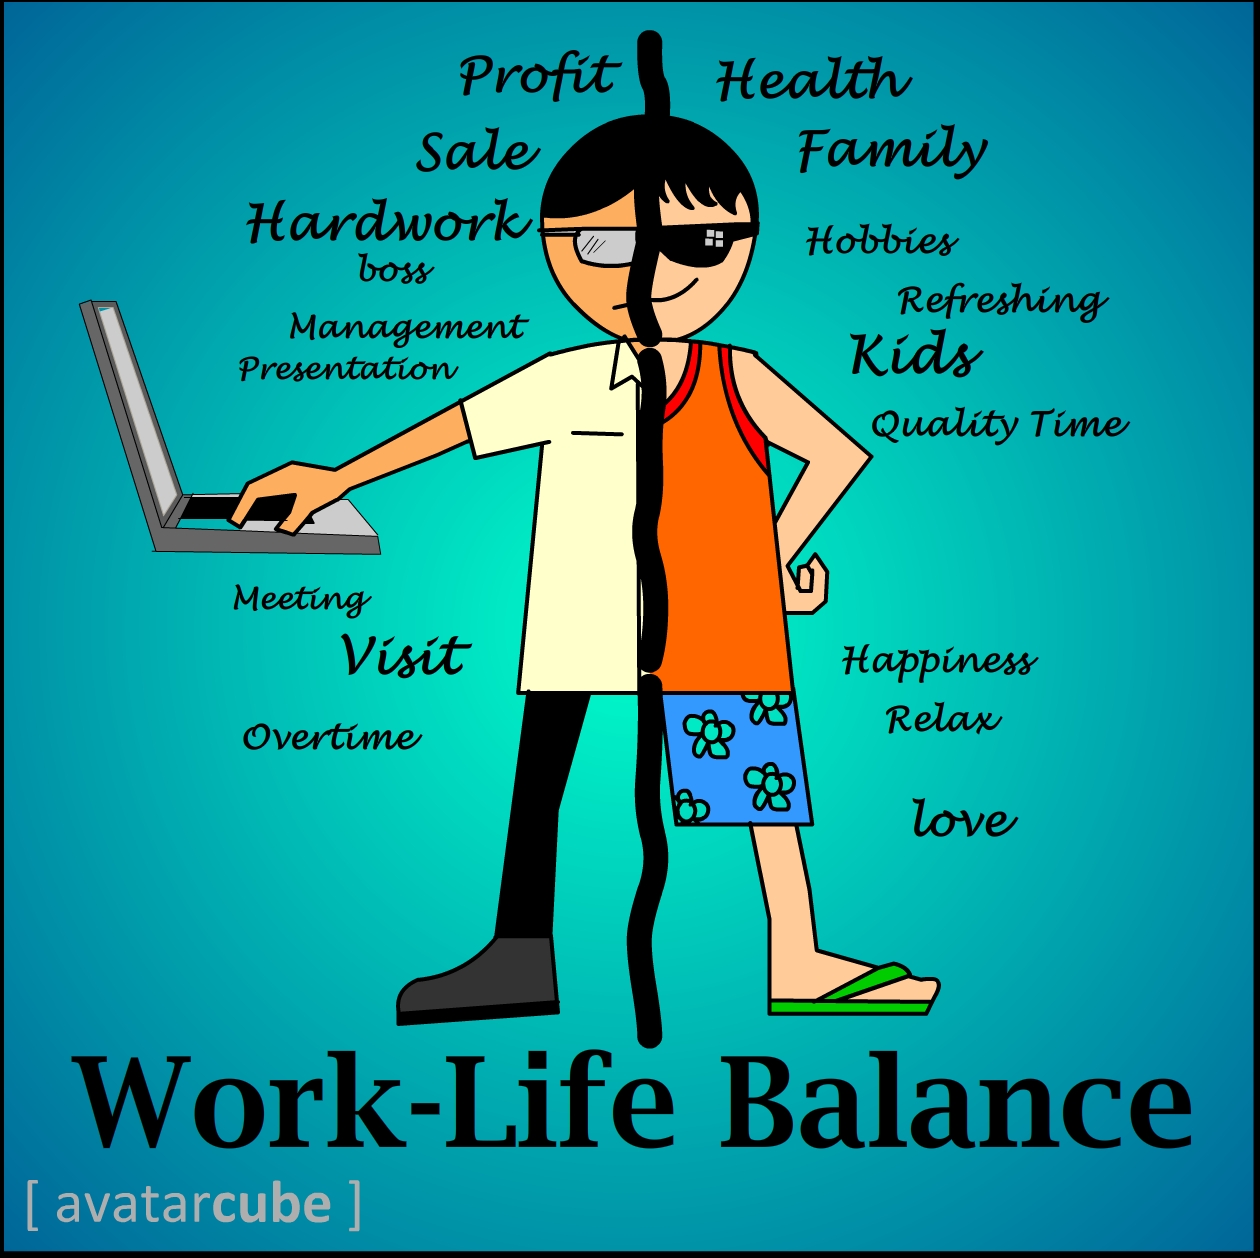 Is extending your working time means your hardworking? If No, justify ...